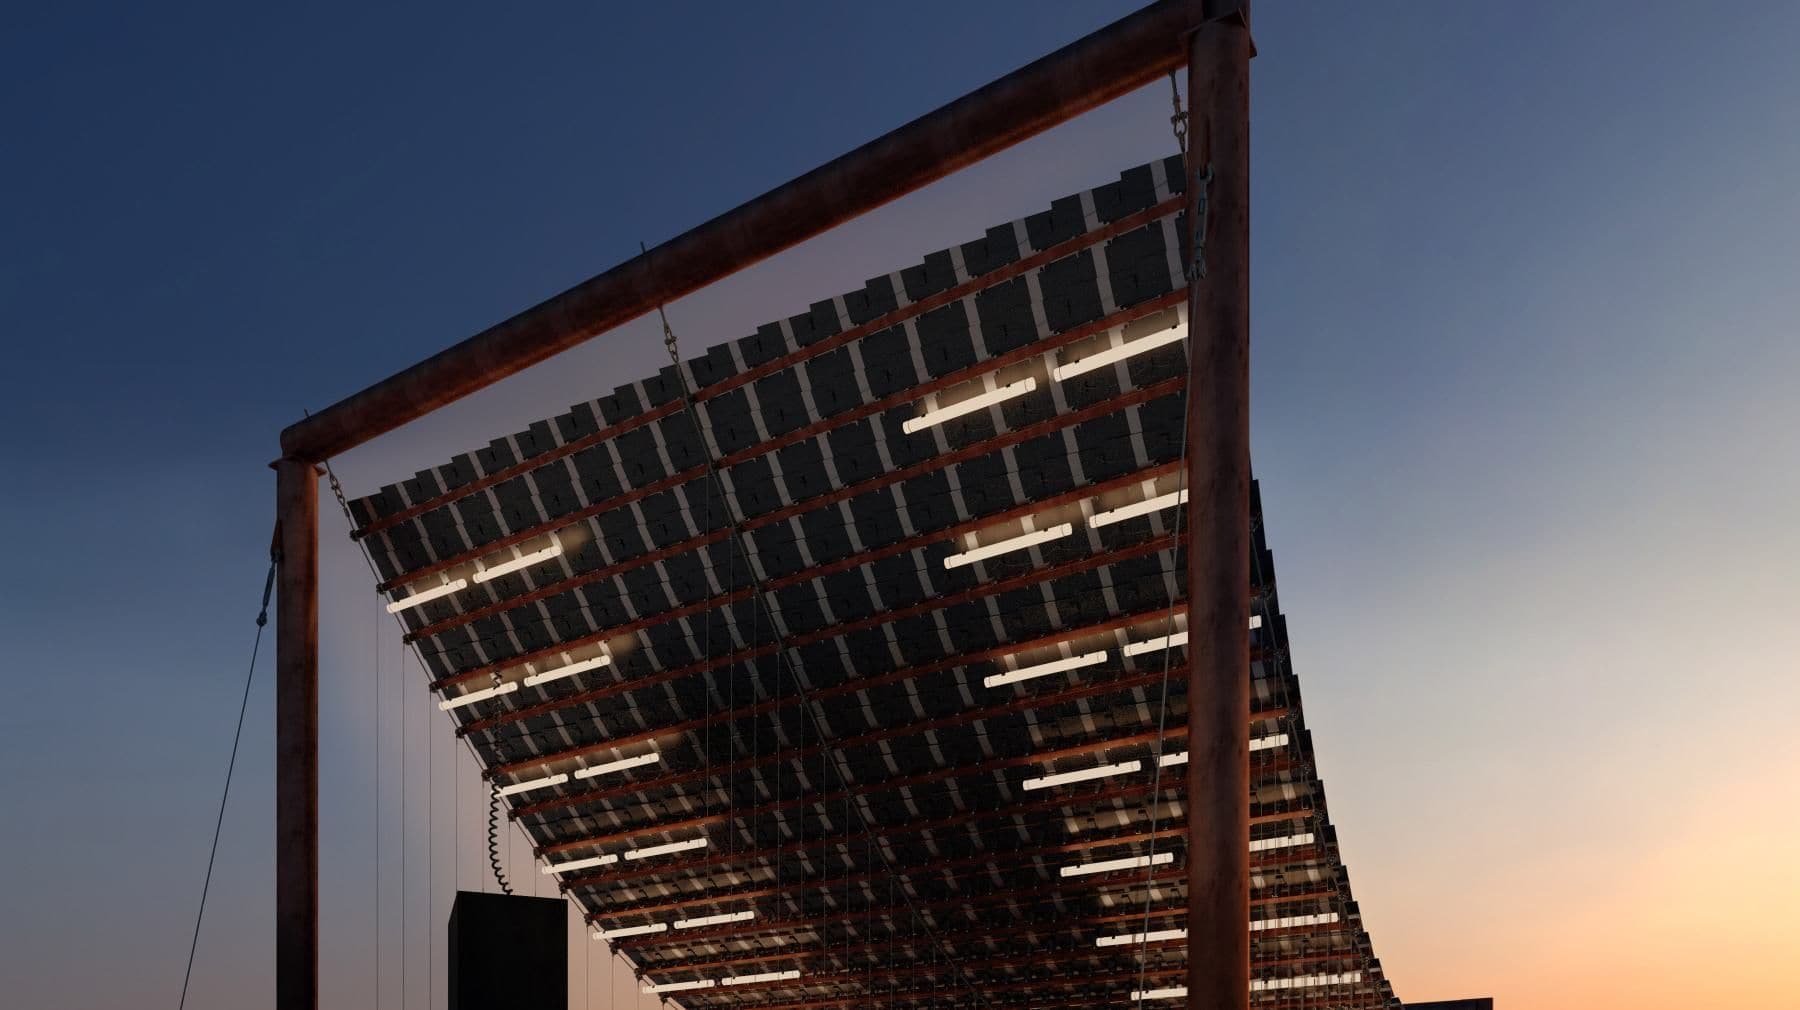 Nighttime view of the underside of the solar pavilion at Dutch Design Week 2022.